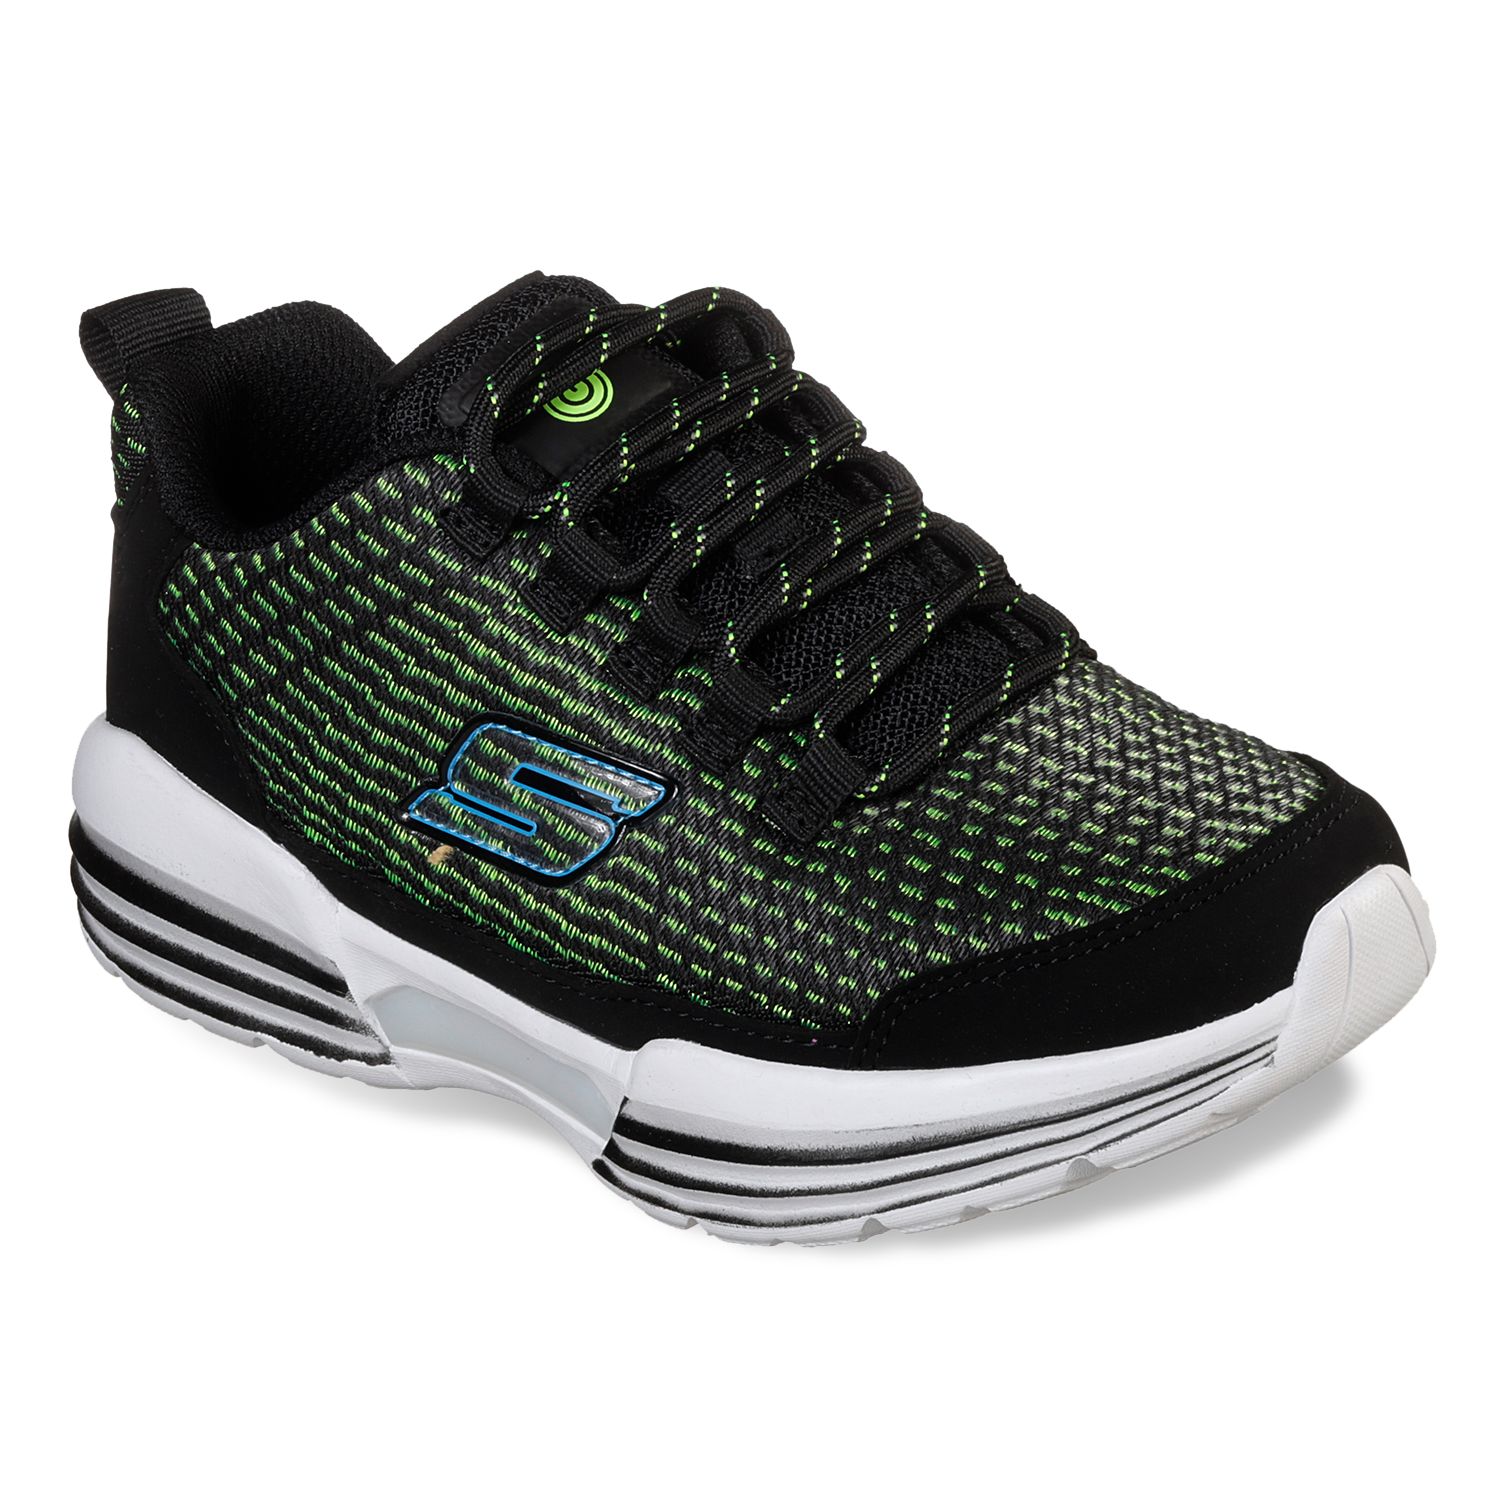 skechers lighted shoes